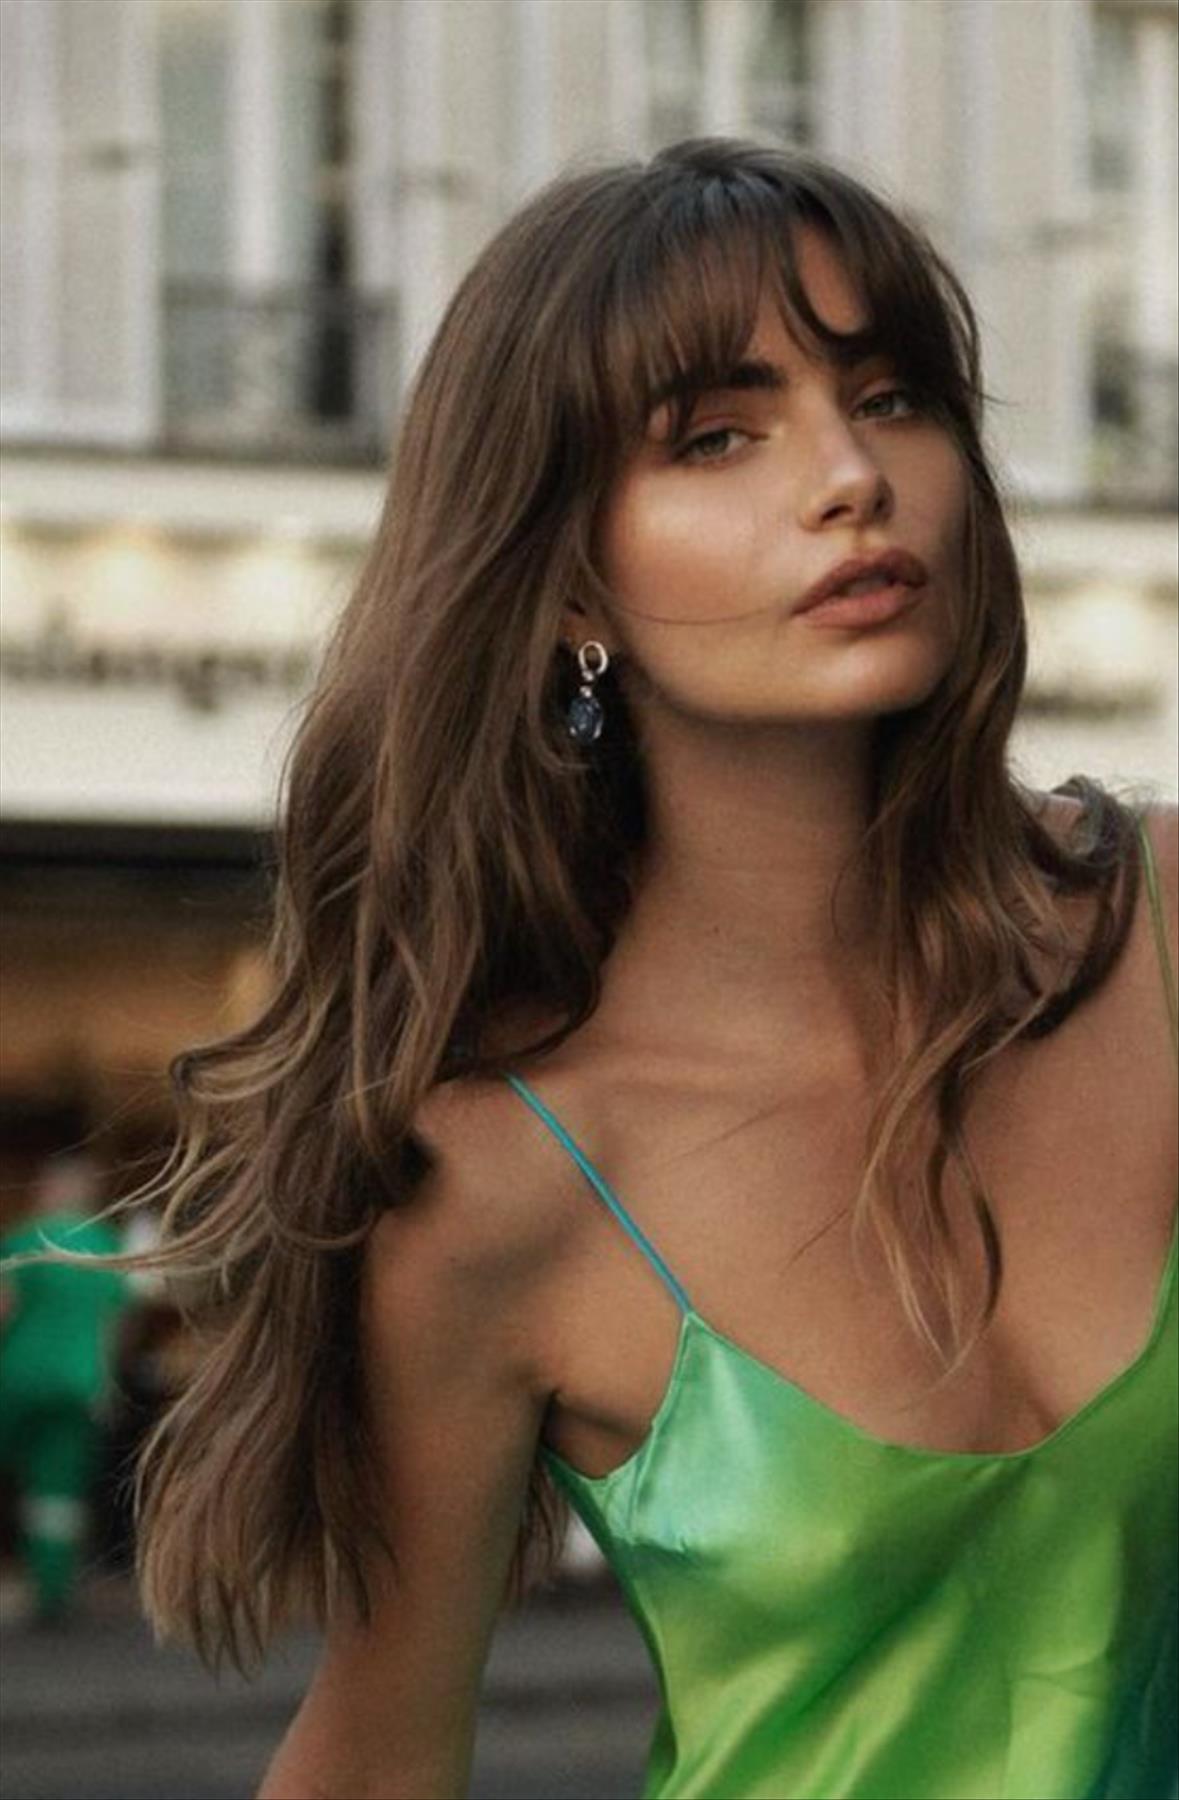 Hairstyle with bangs 2022 inspo curtain bangs and fringe bangs hair trends